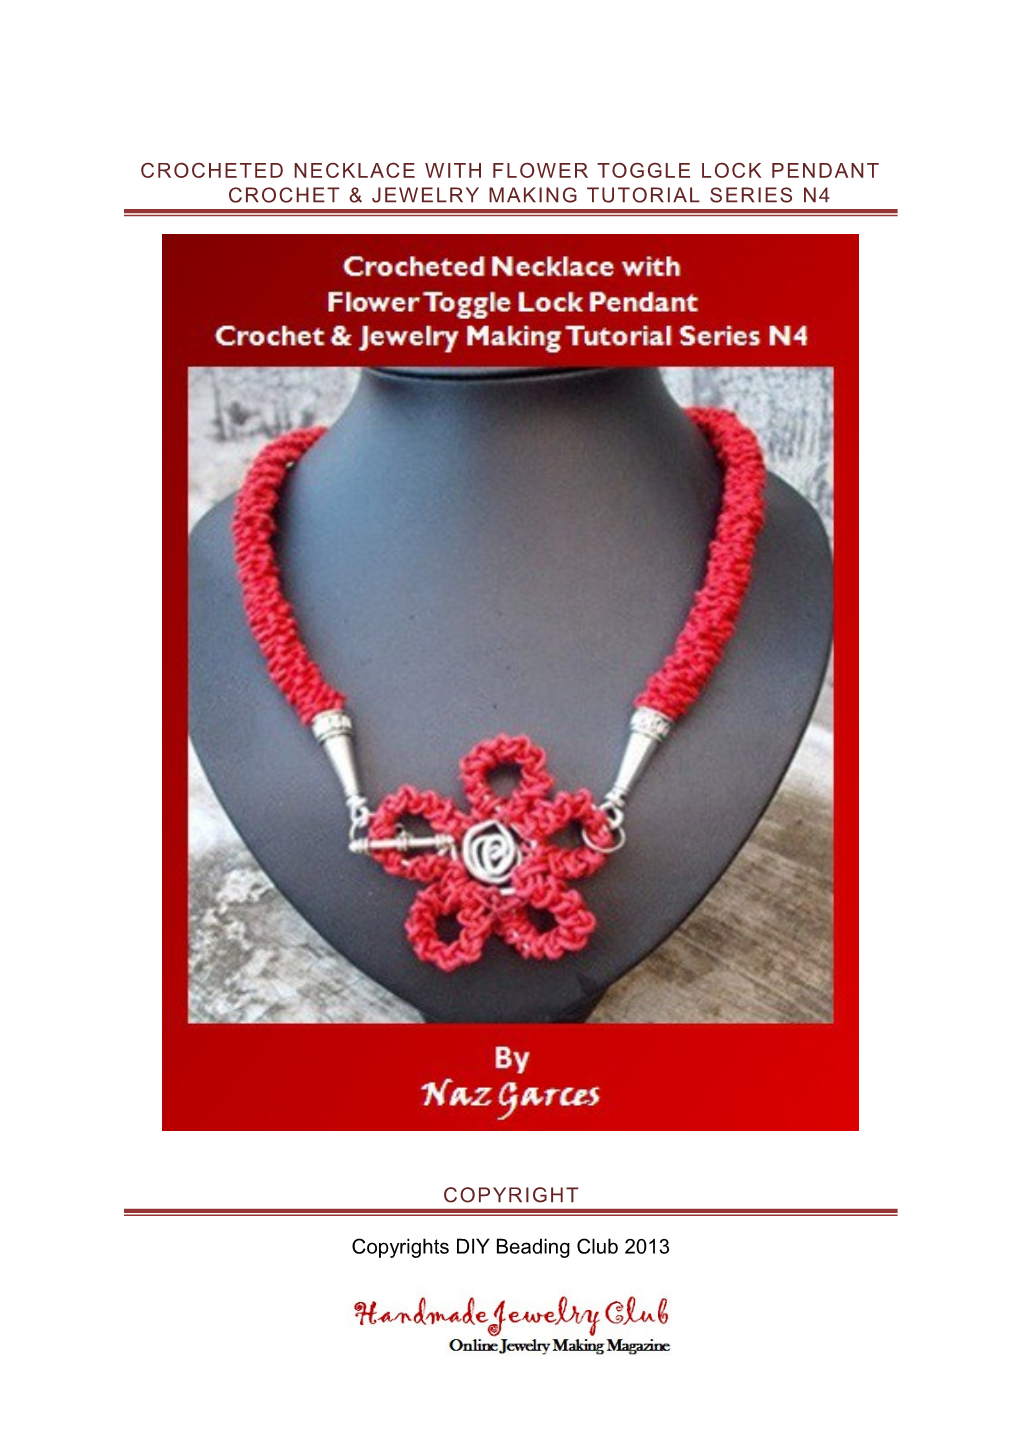 Crocheted Necklace with Flower Toggle Lock Pendantcrochet& Jewelry Making Tutorial Series N4